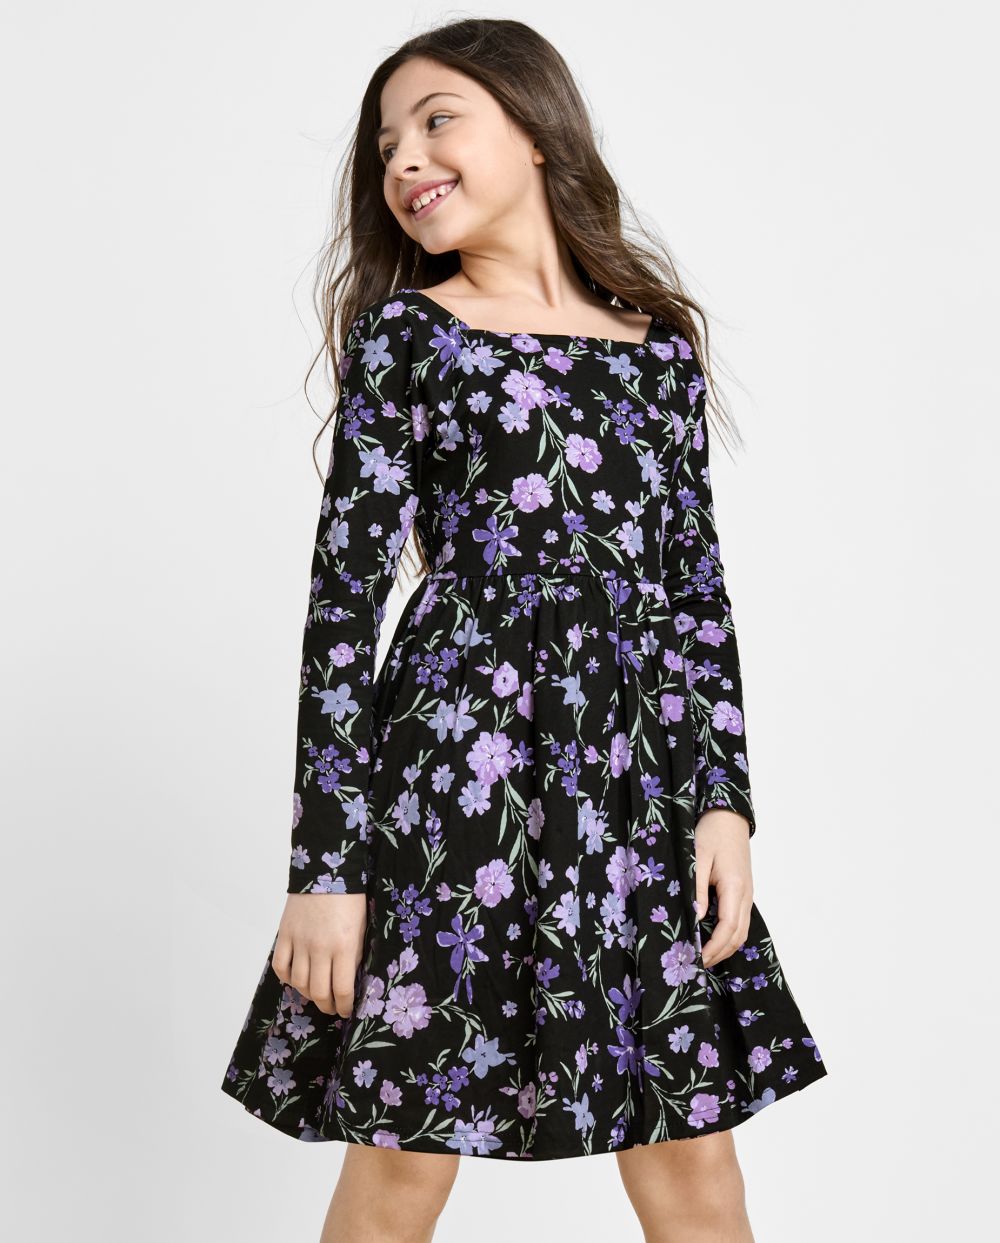 Girls Long Sleeves Above the Knee Square Neck Floral Print Dress